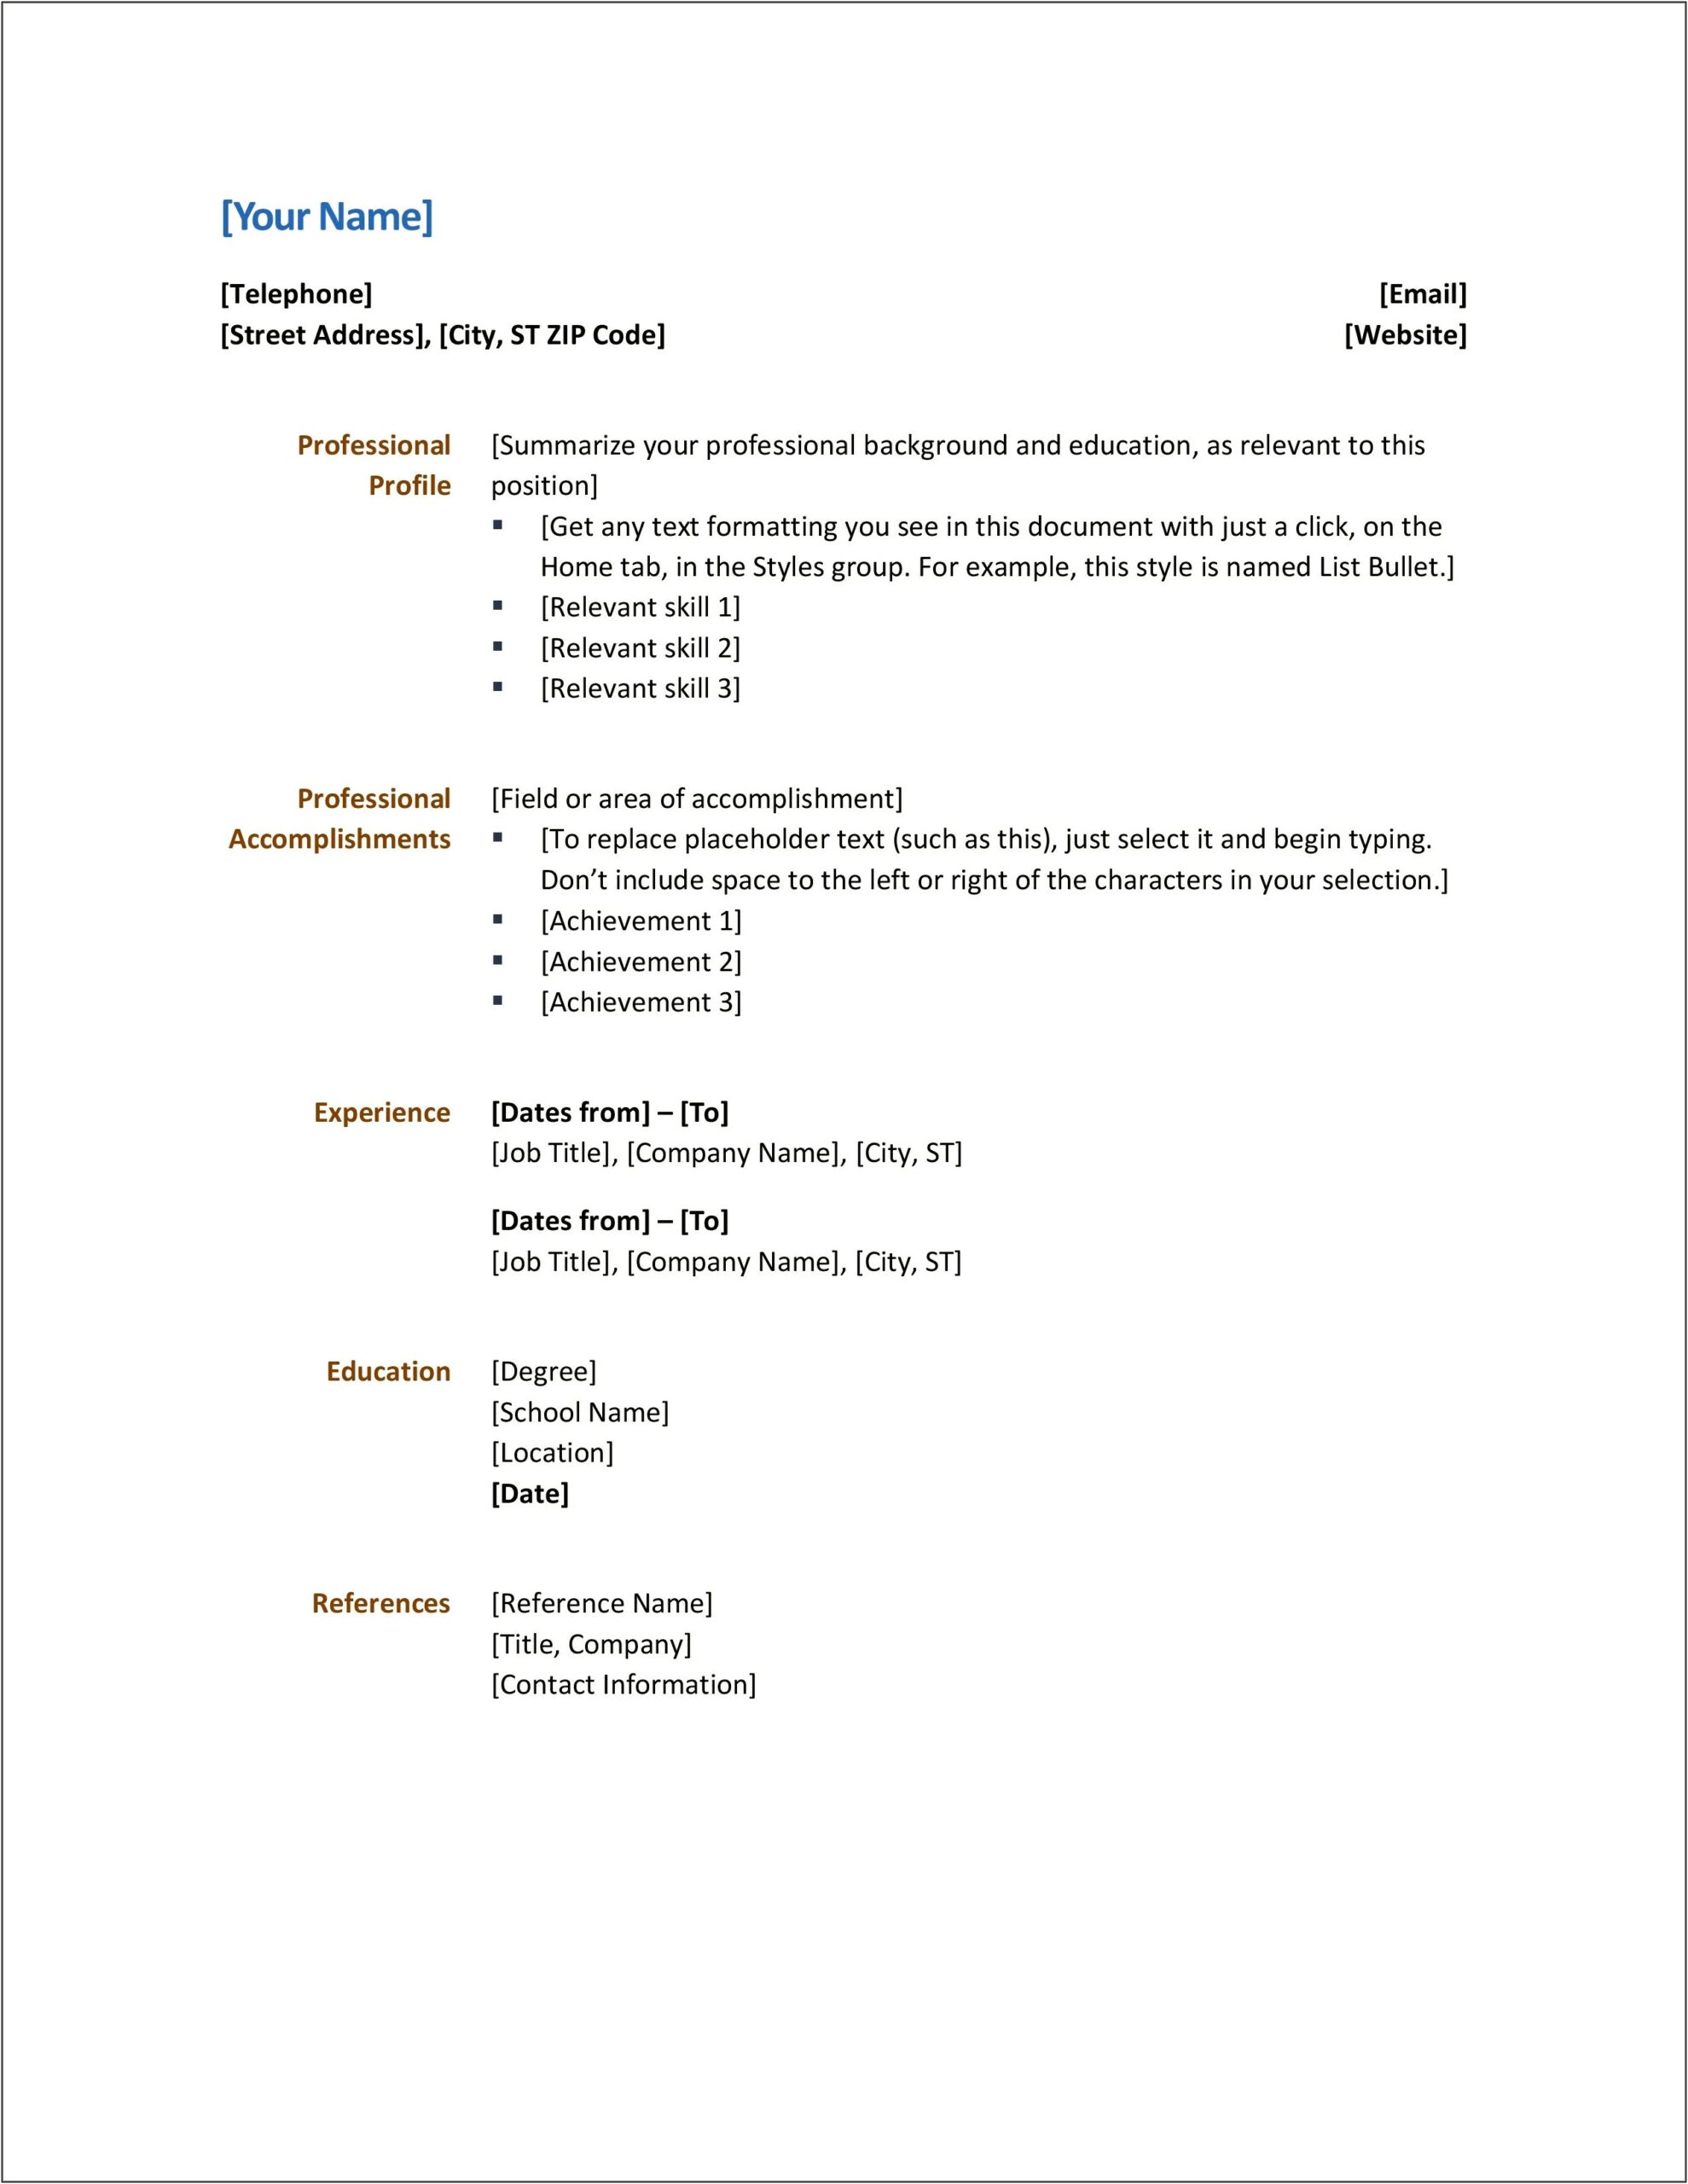 Skills Such As Microsoft Office On Resume